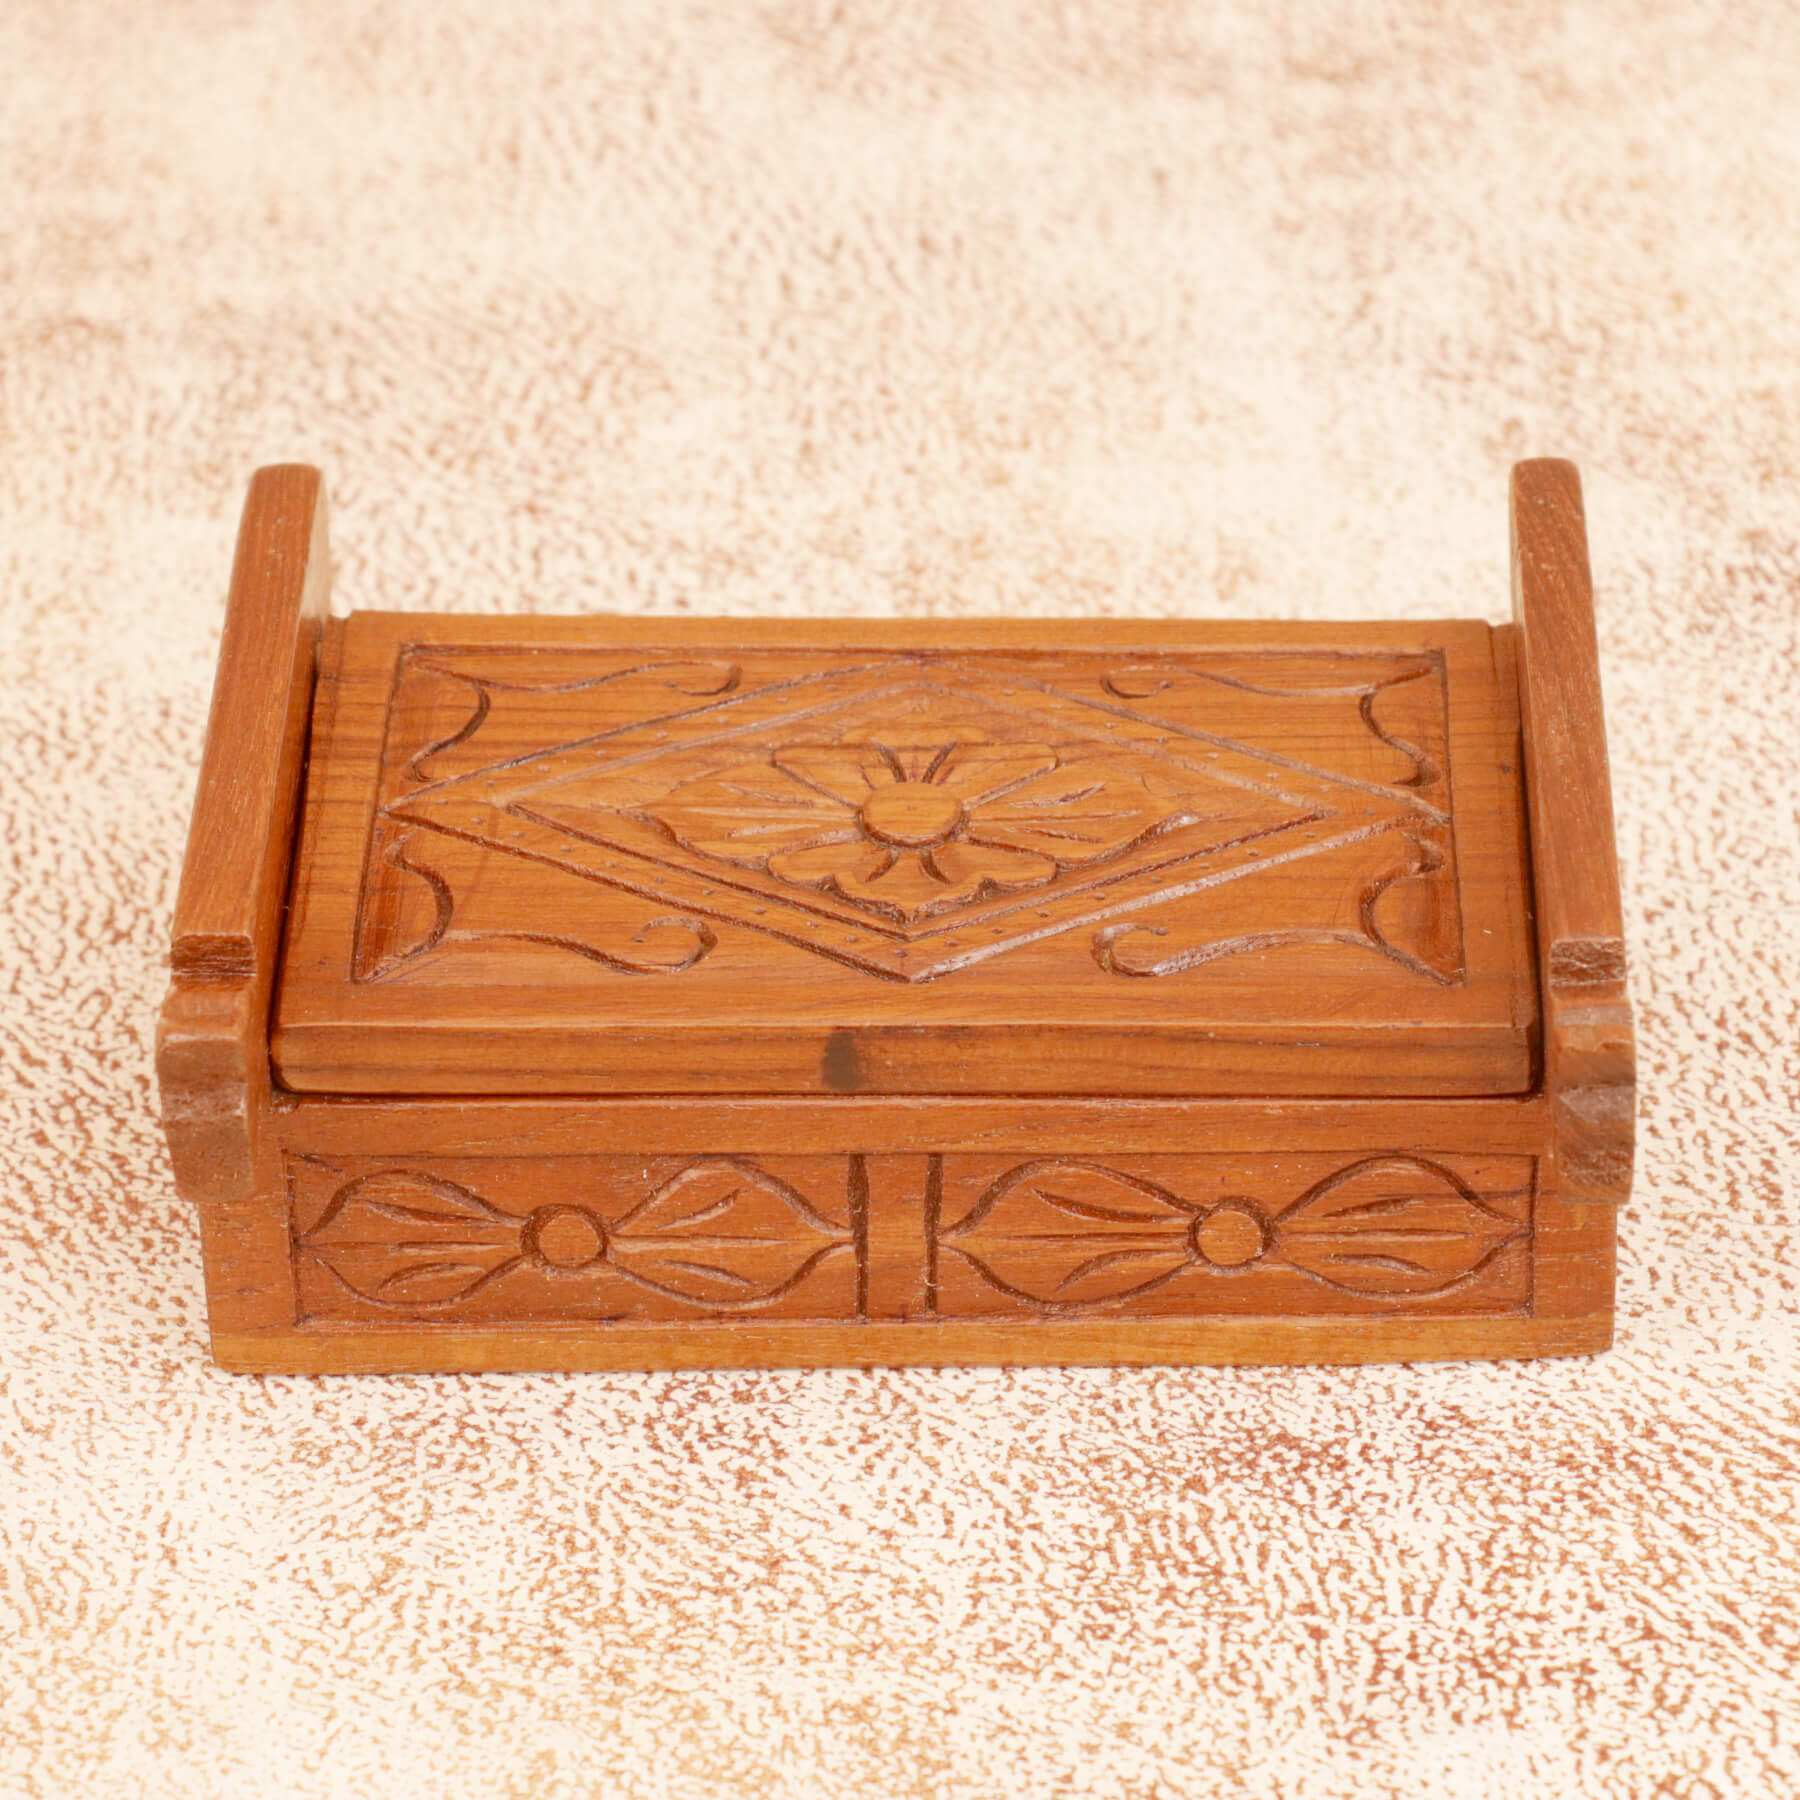 Wood Carved Box Wooden Box